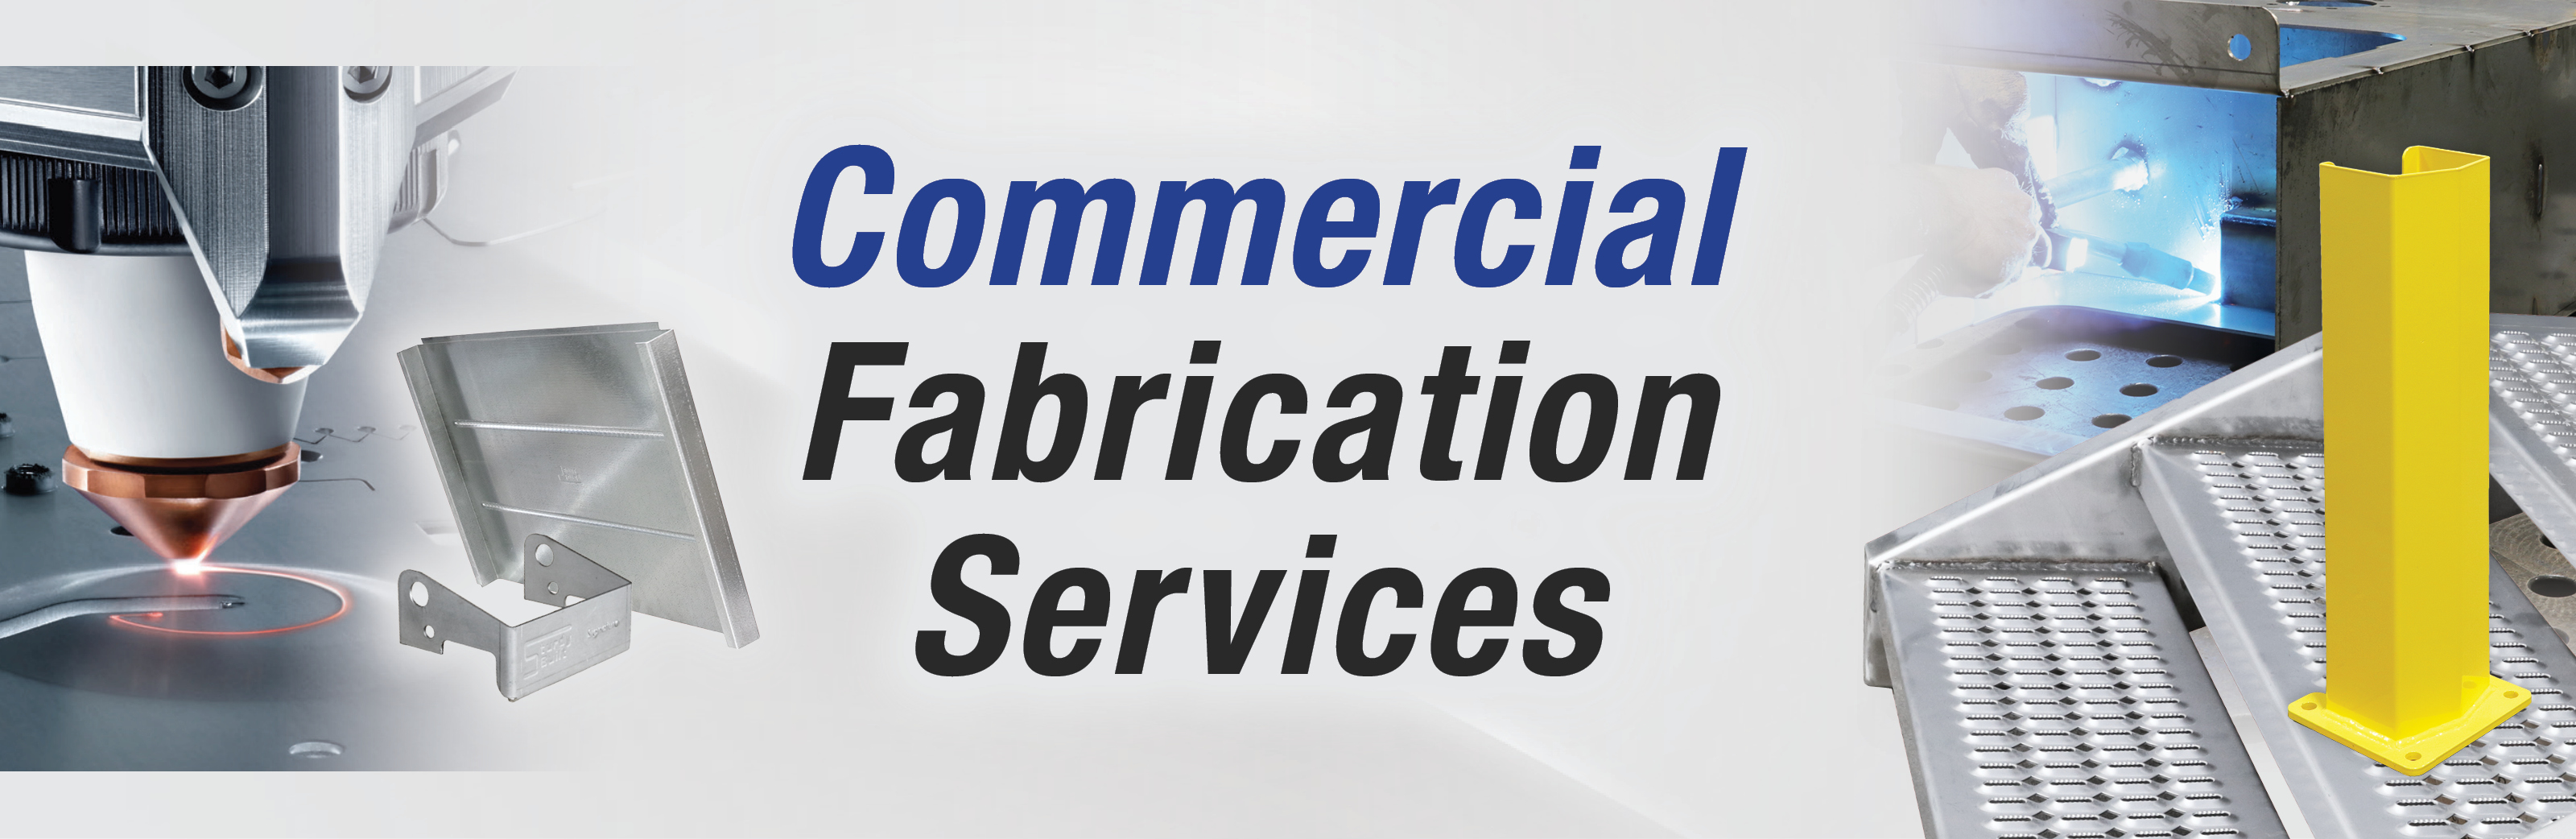 Commercial Fabrication Services - Mobile